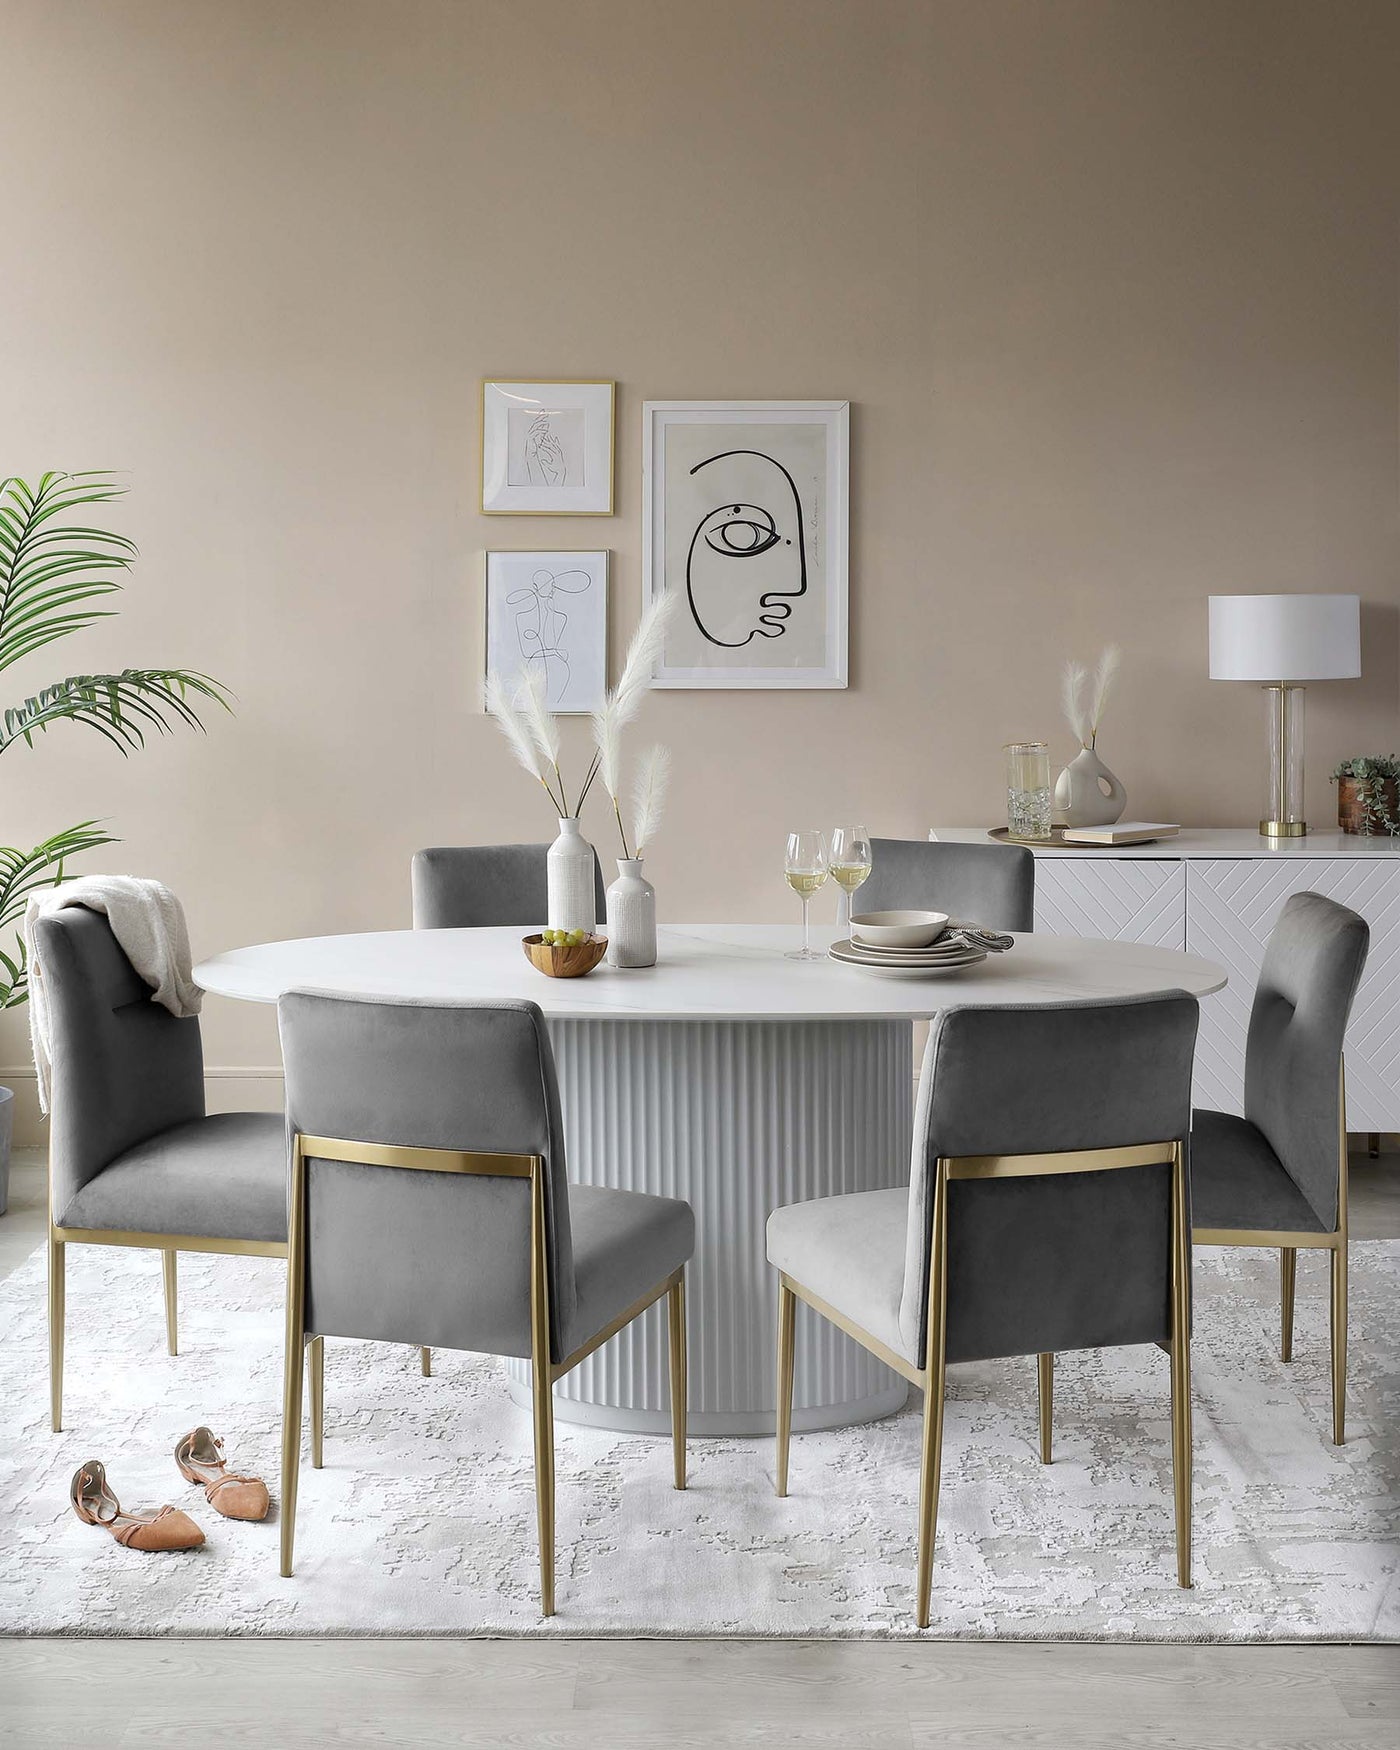 Elegant dining room featuring a round, white table with a pleated design on its pedestal base, accompanied by four plush velvet-upholstered chairs in a matching cool grey tone. Each chair sports a minimalist gold-finished metal frame, providing a sleek contrast against the soft upholstery. The furniture ensemble is set atop a subtle white textured area rug, adding a layer of warmth to the modern and sophisticated dining setting.